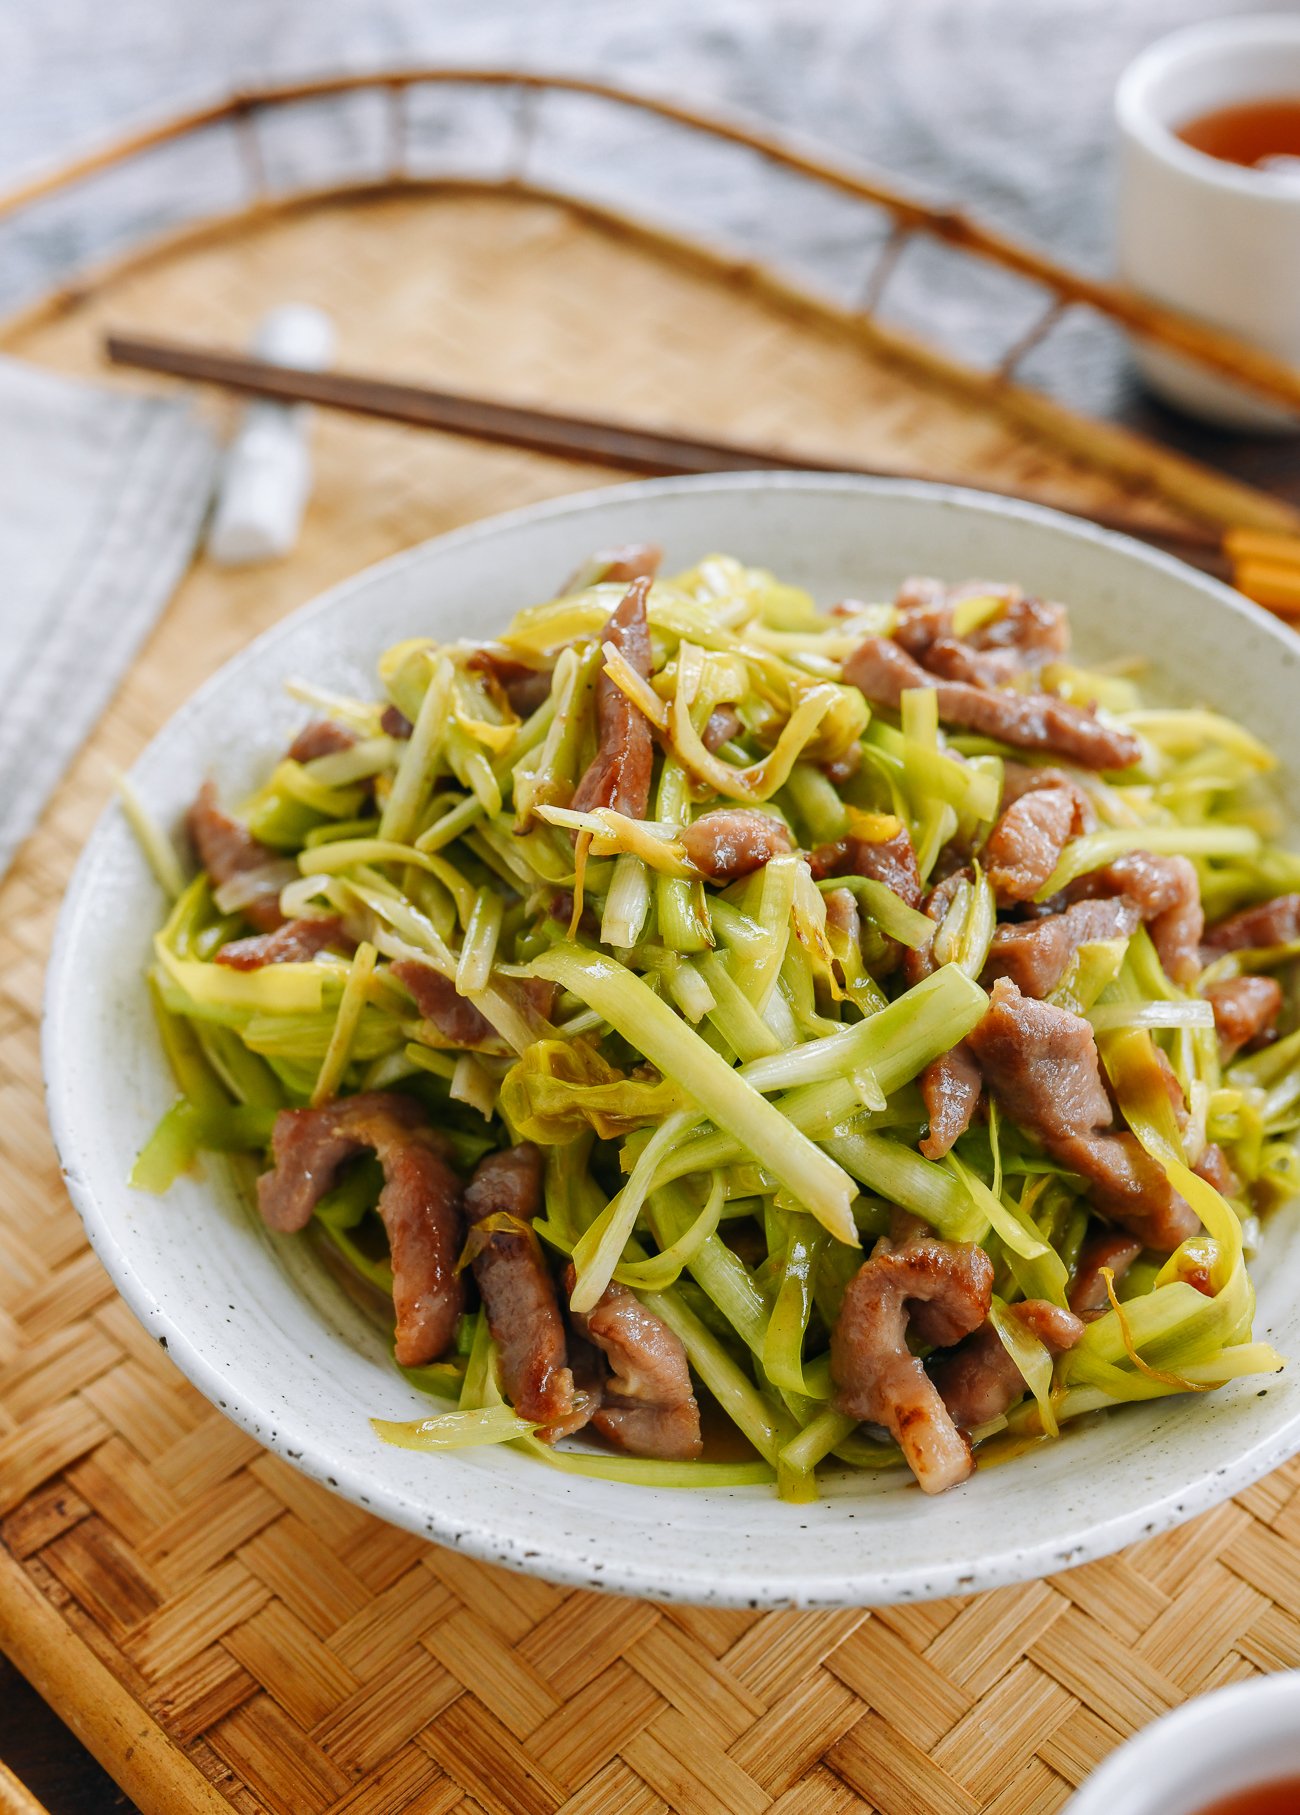 Stir-fried Yellow Chives with Pork